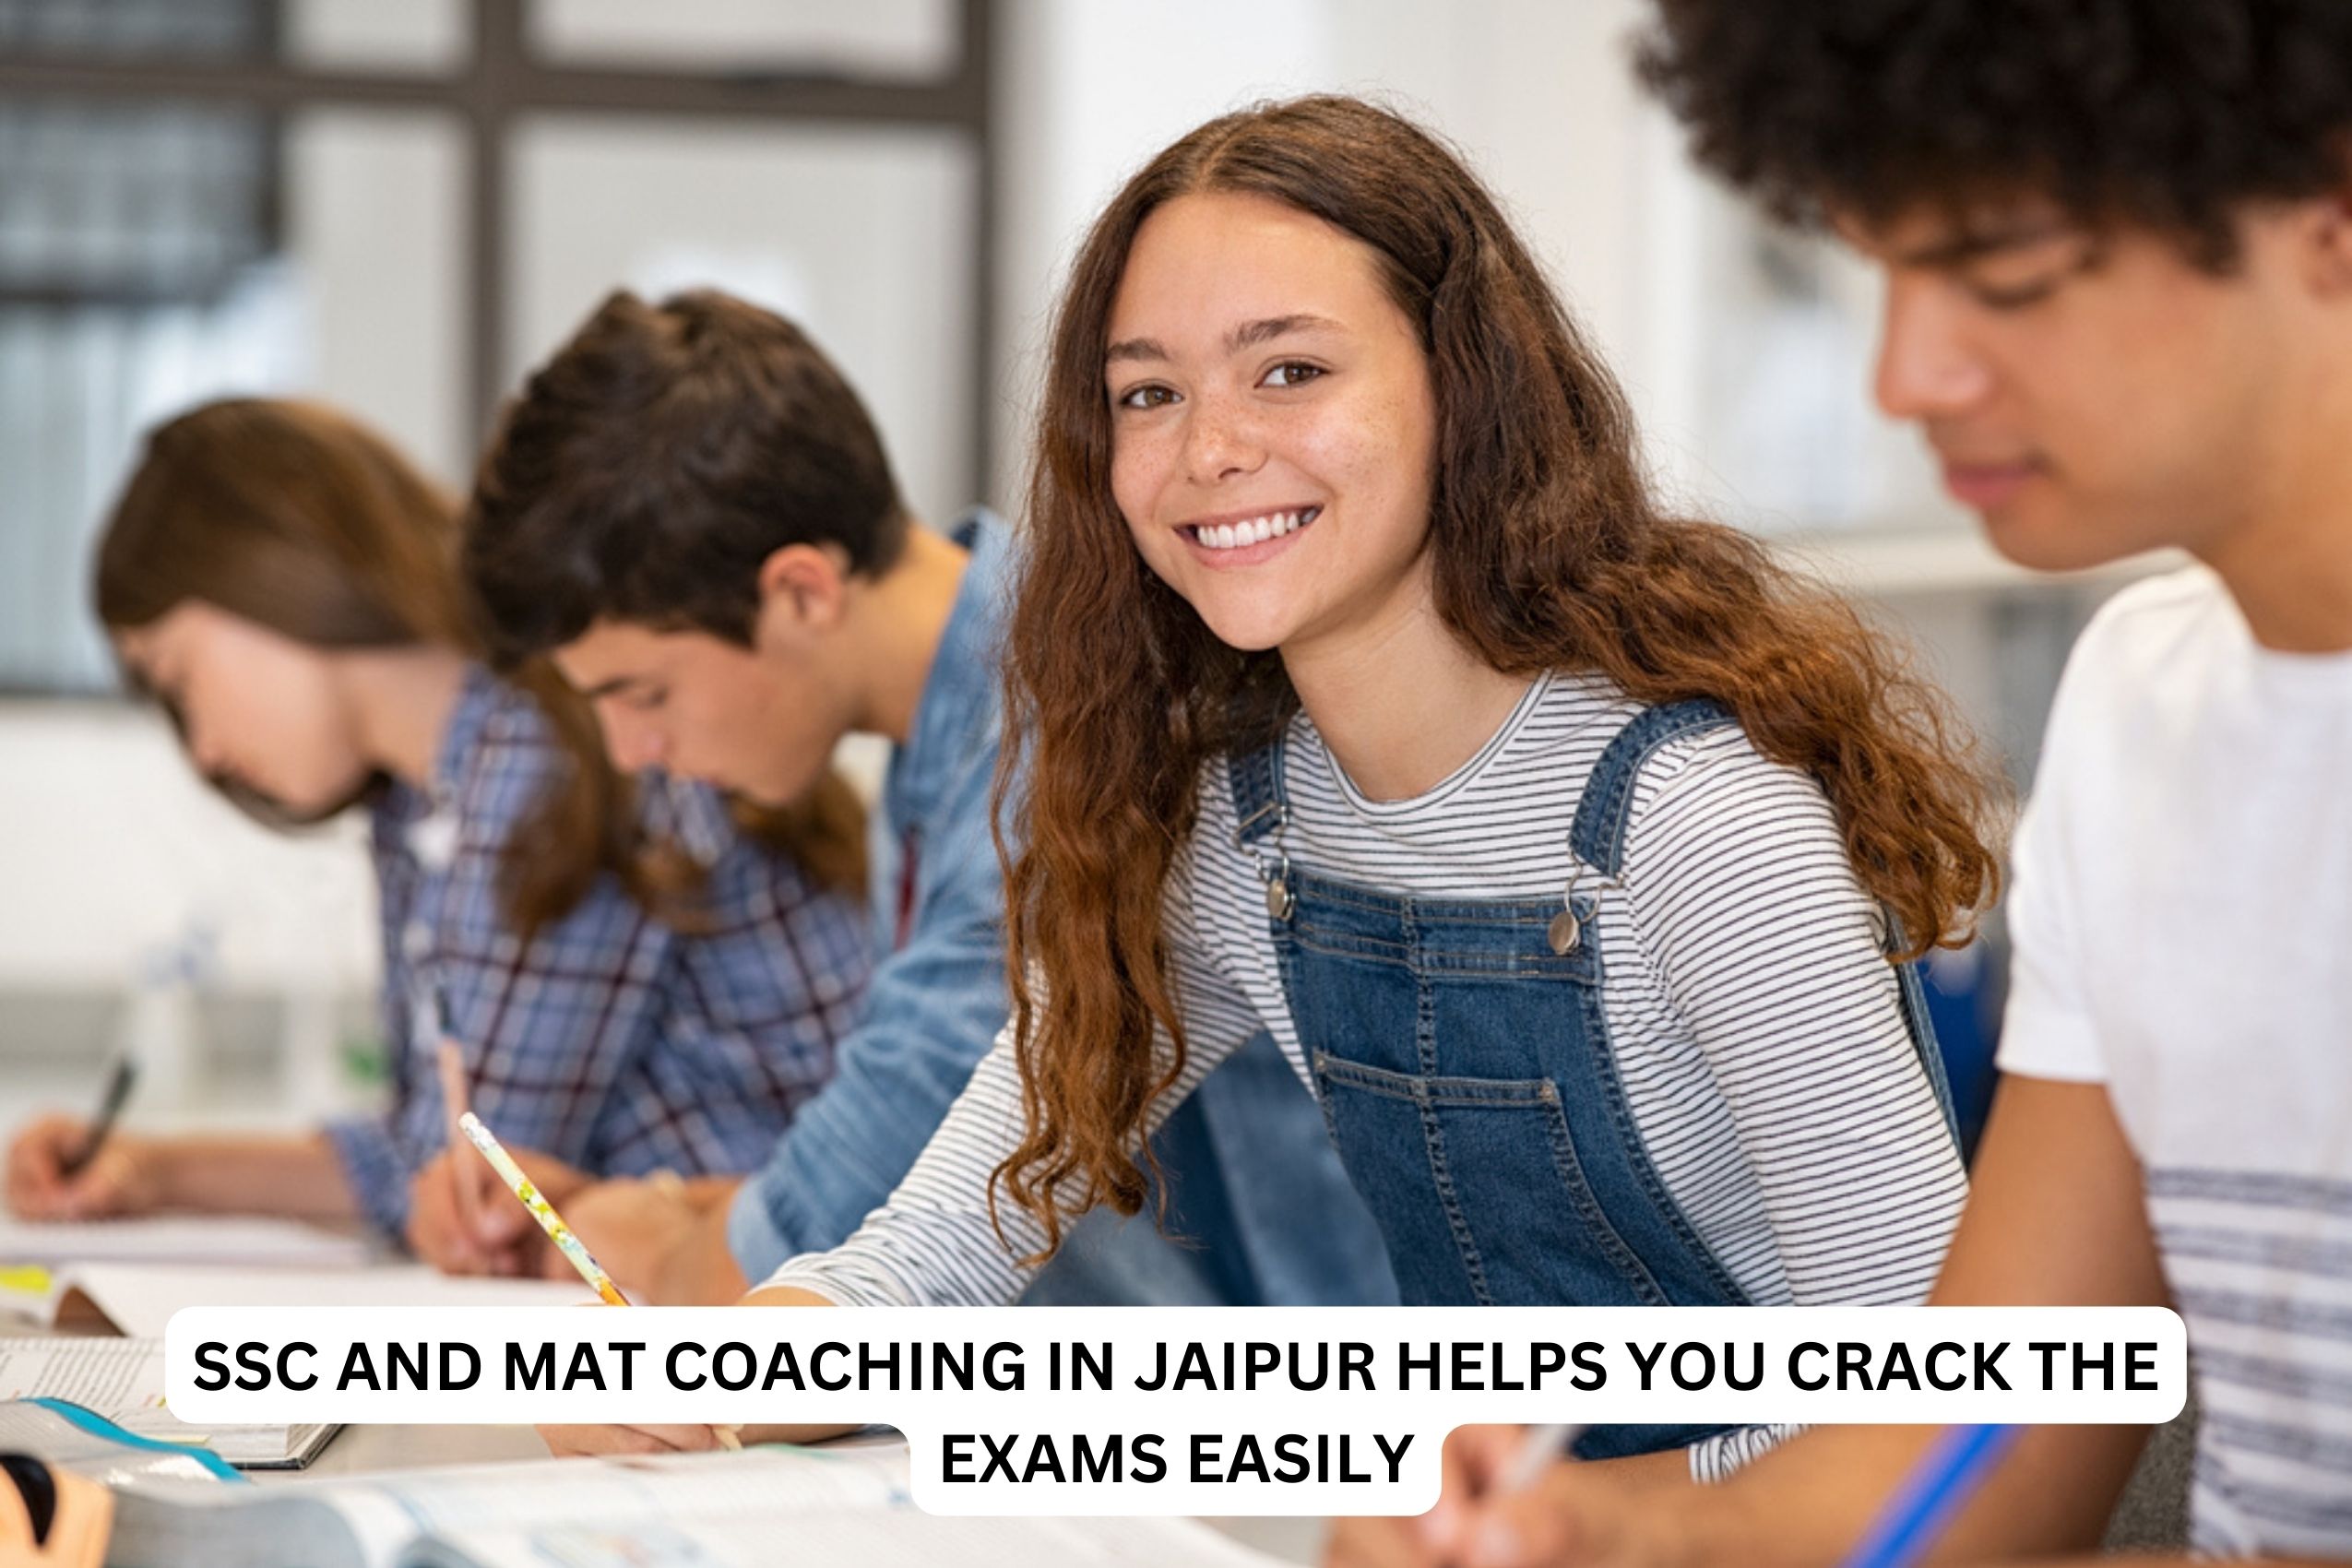 SSC and MAT Coaching in Jaipur Helps you Crack the Exams Easily